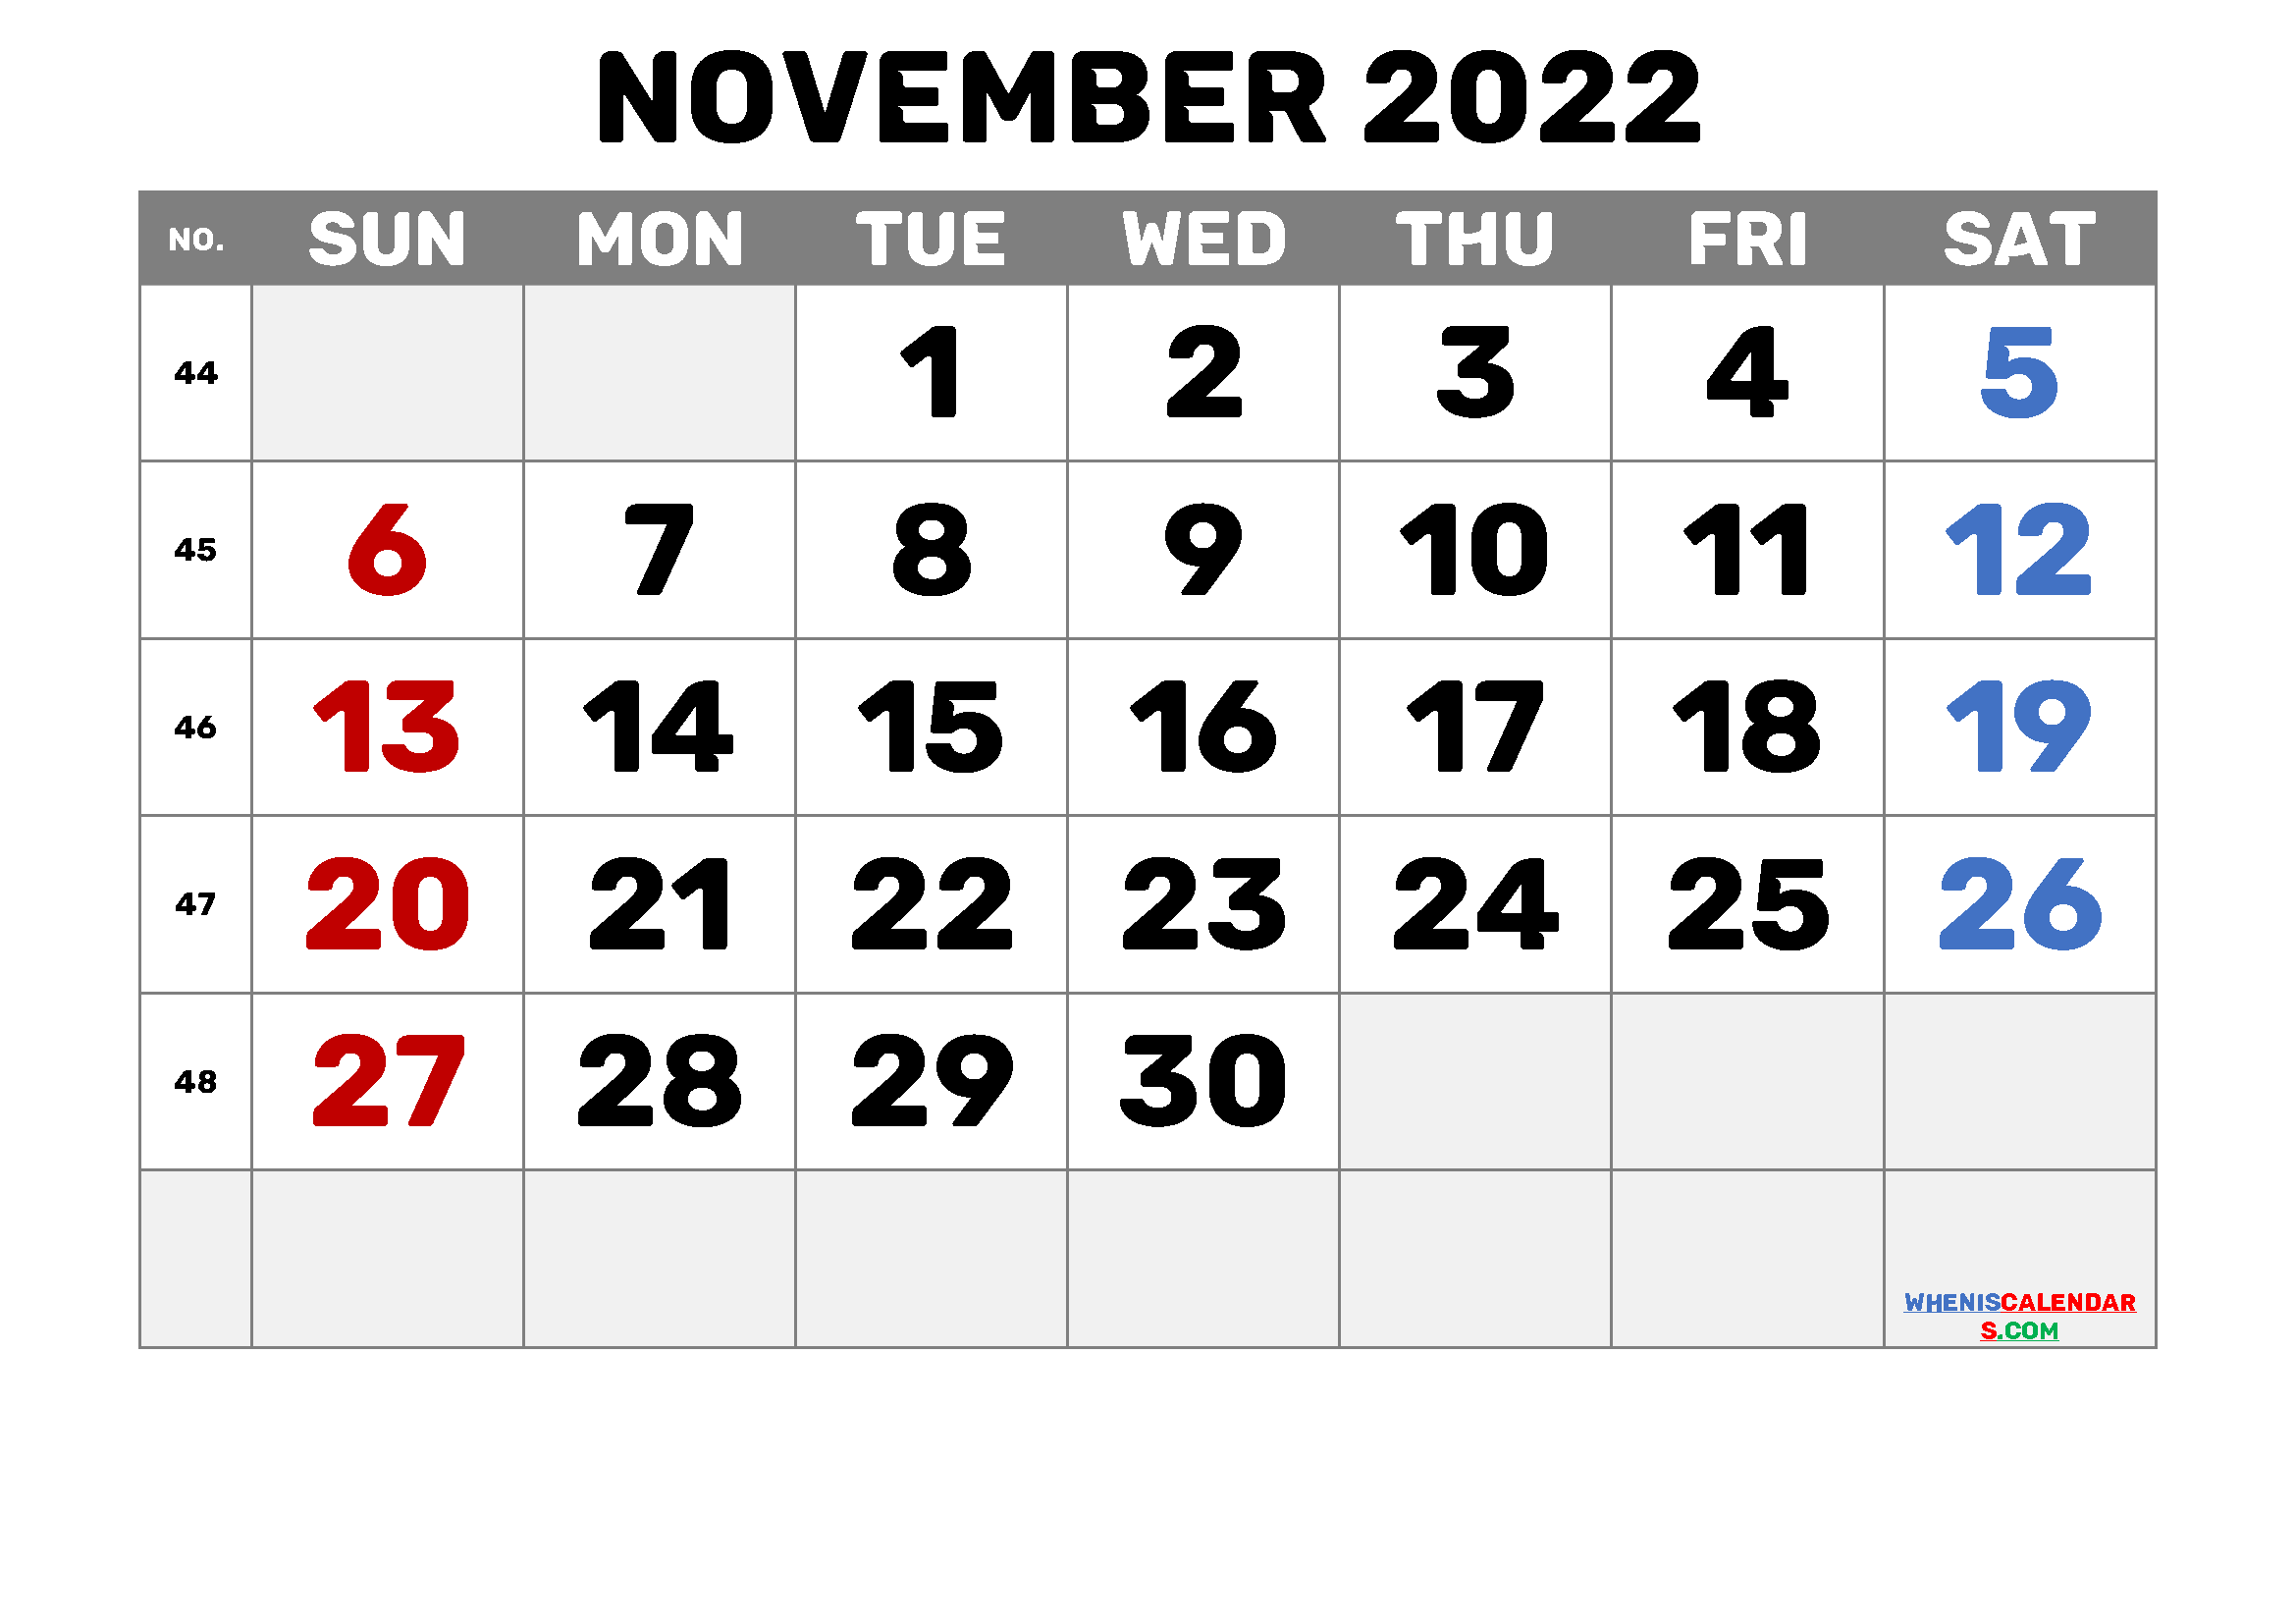 Free Printable Calendar November 2022 with Week Numbers as PDF document and high quality Image file (landscape format and can print with A3, A4)